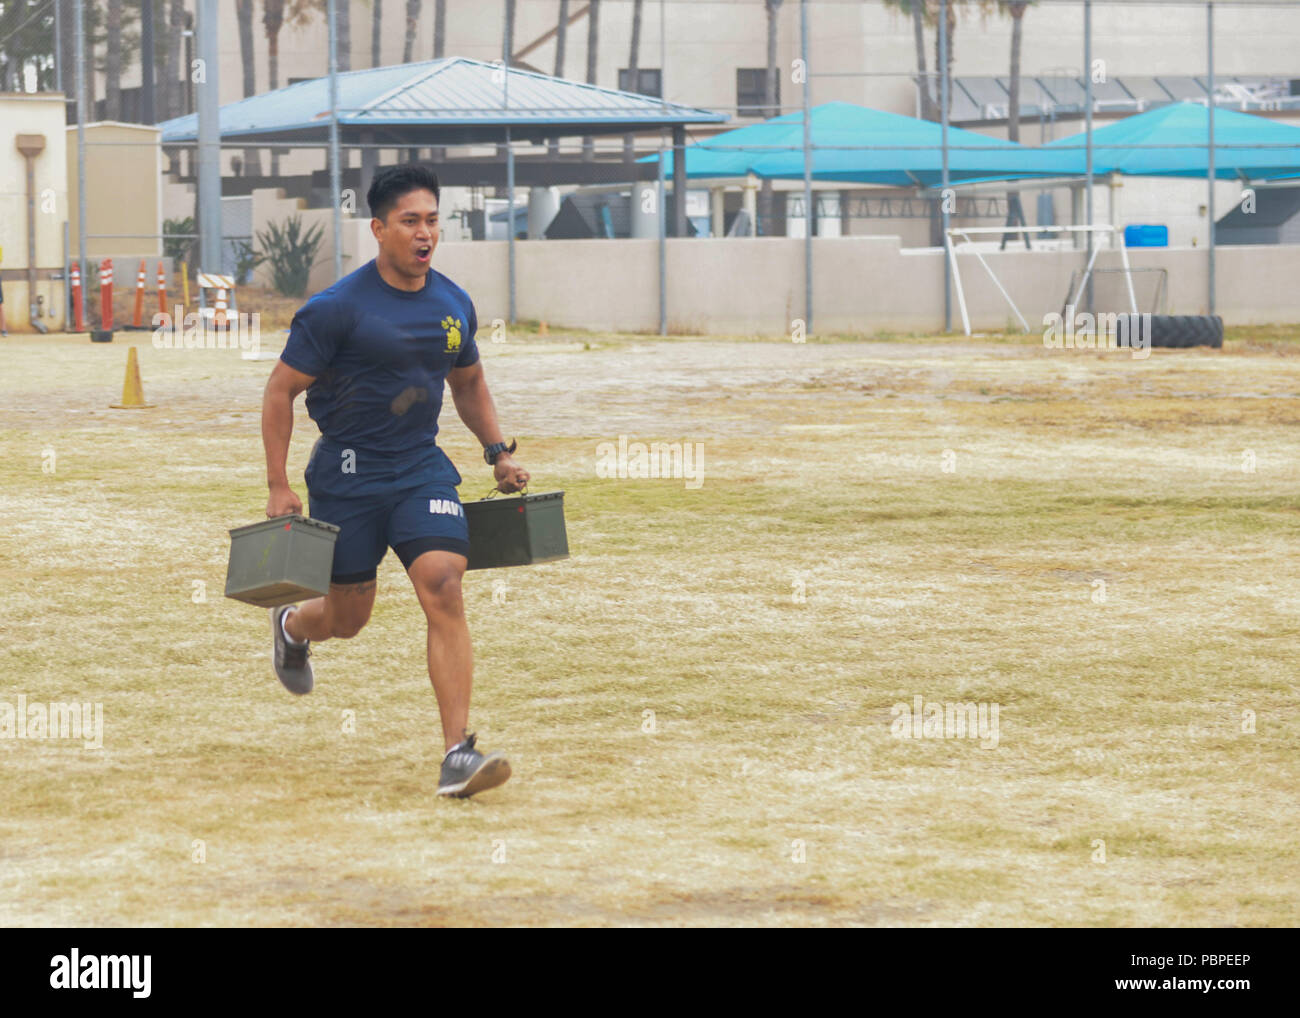 180720-N-PN275-1173 SAN DIEGO (July 20, 2018) Chief Hospital Corpsman Paul Barnachea  runs with ammo cans for an obstacle course in Naval Medical Center San Diego’s Sailor Games to observe the launch of Sailor 360. Sailor 360 is the Navy’s new leadership training curriculum, which is designed to provide meaningful training to Sailors of all ranks. (U.S. Navy Photo by Mass Communication Specialist 2nd Class Zach Kreitzer) Stock Photo